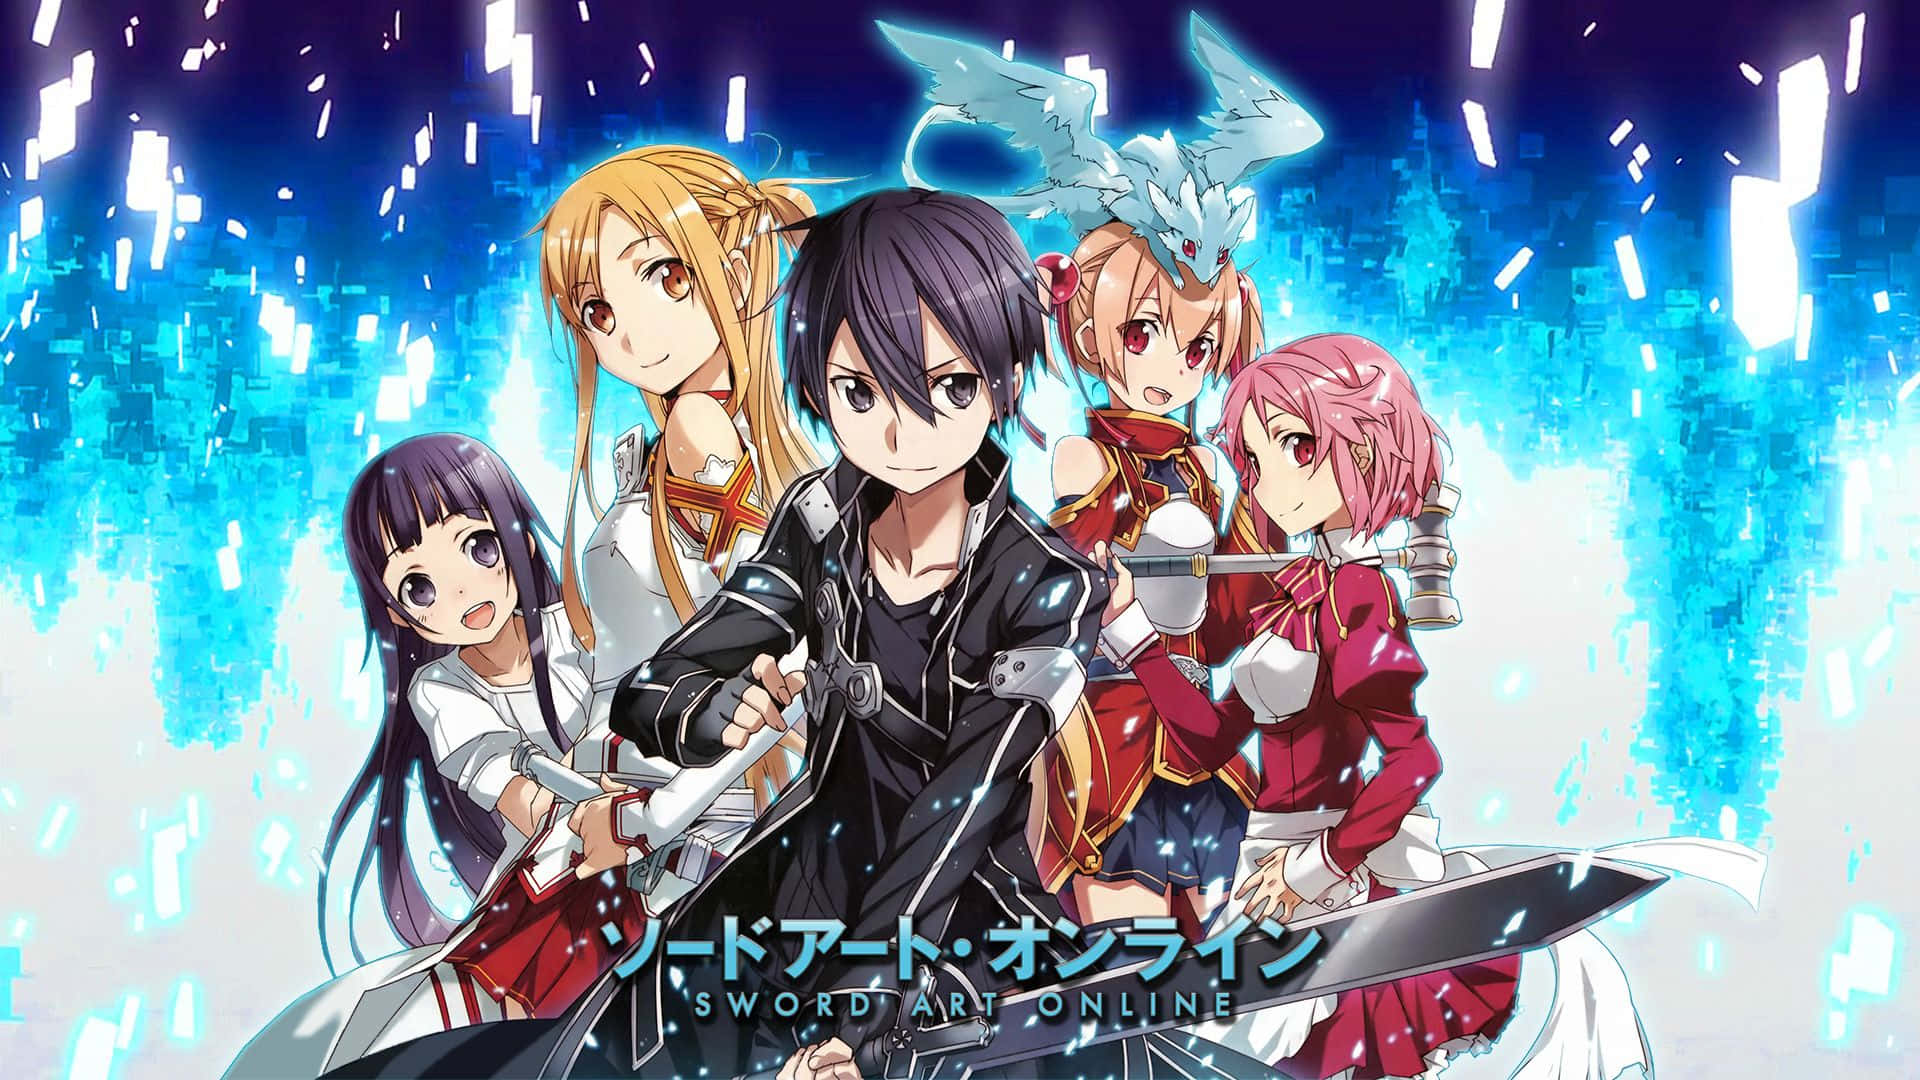 Explore an adventure in the world of Sao